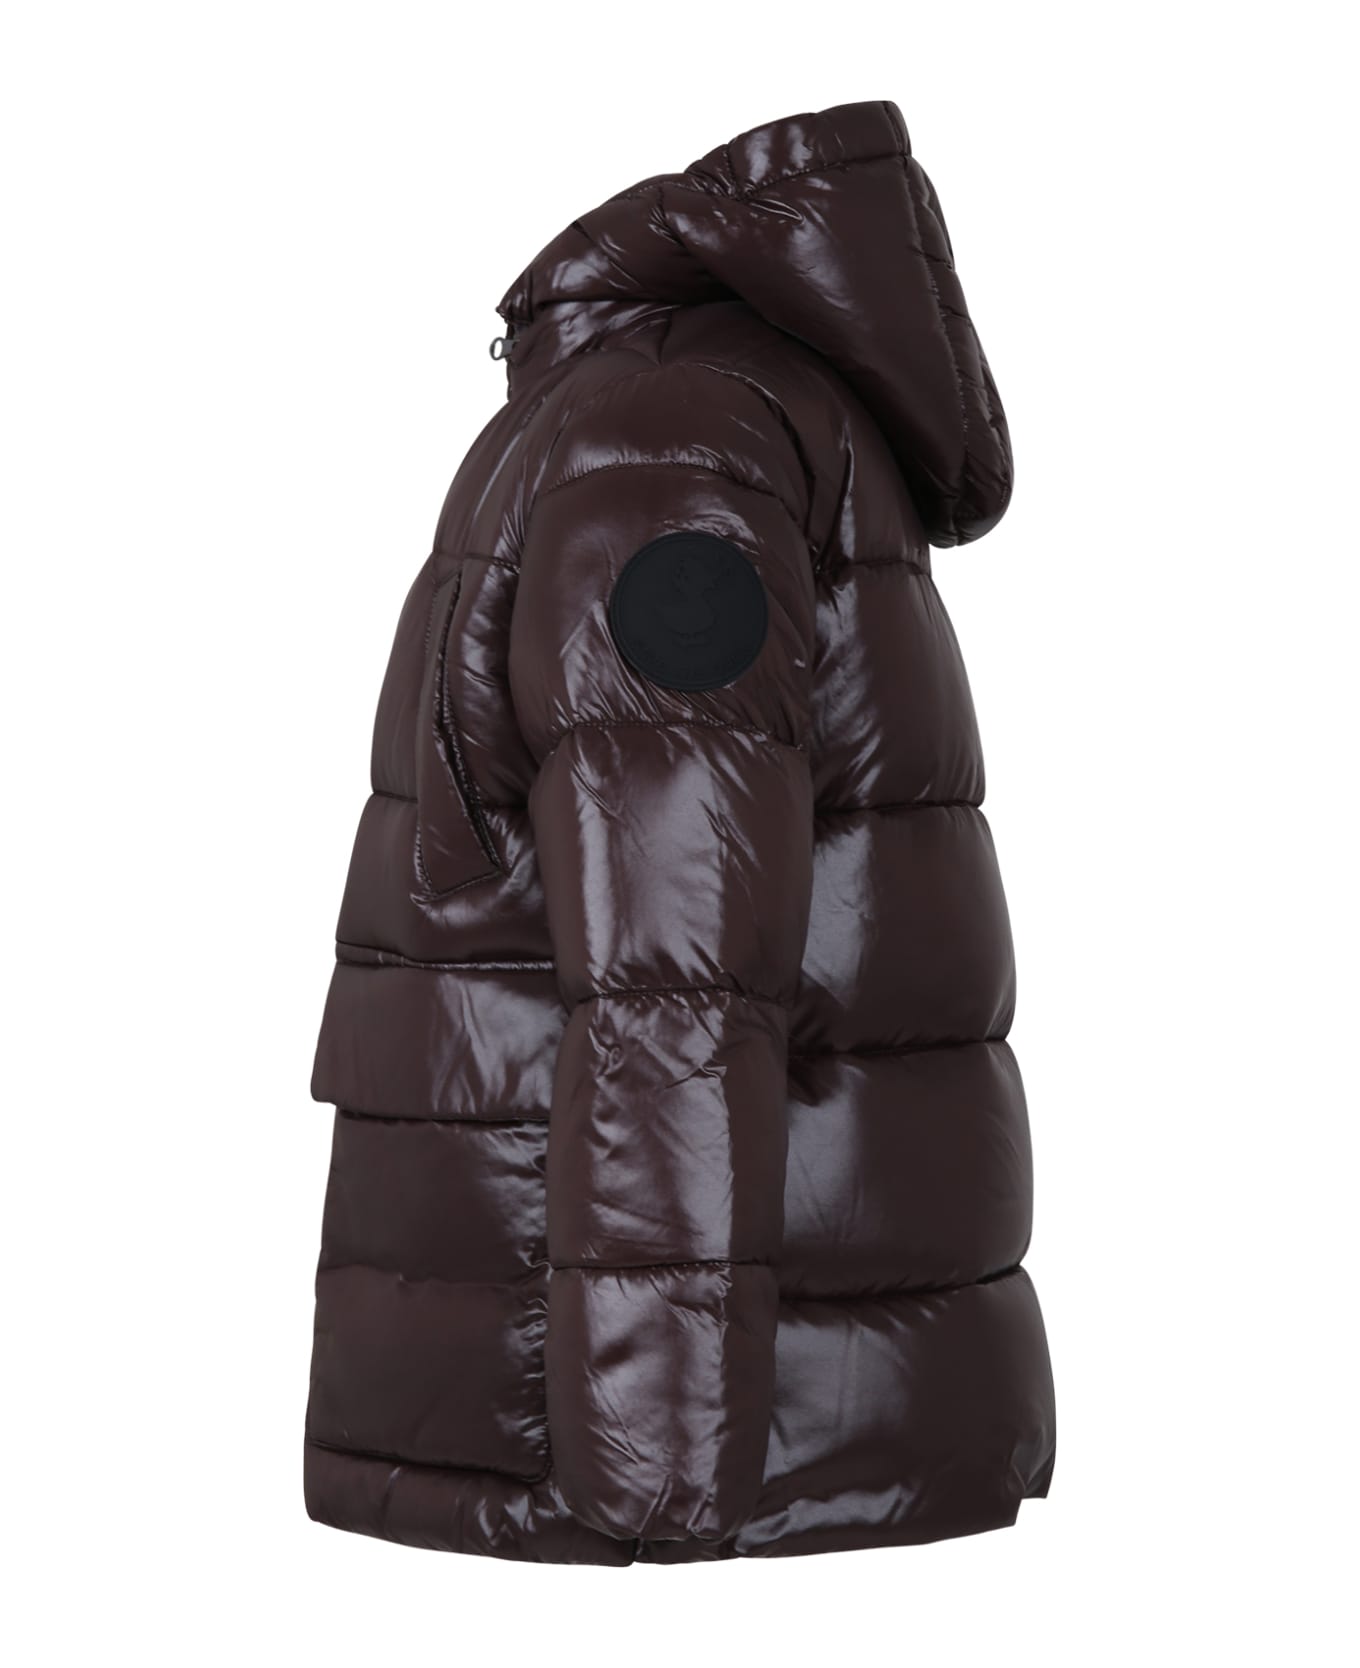 Save the Duck Brown Jacket For Boy With Logo - Brown